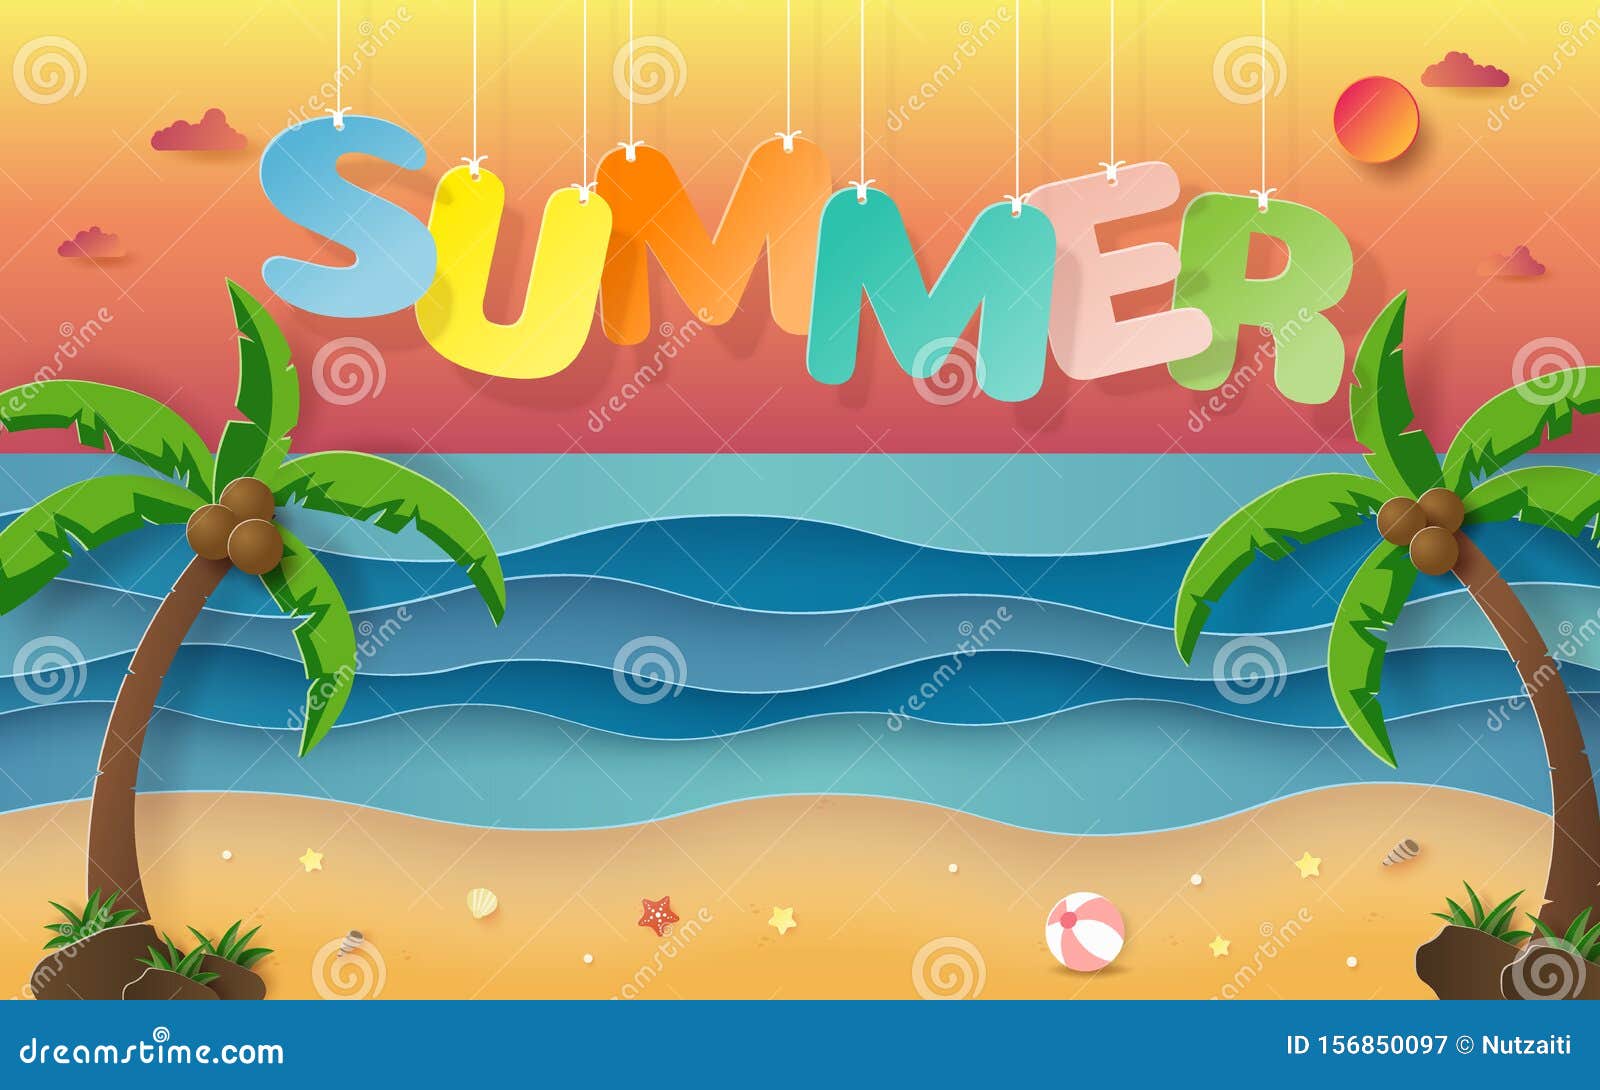 Origami Paper Art of Summer Season, Hanging Word Summer with Background of  the Tropical Beach with Sunset in the Evening Stock Illustration -  Illustration of decoration, beach: 156850097